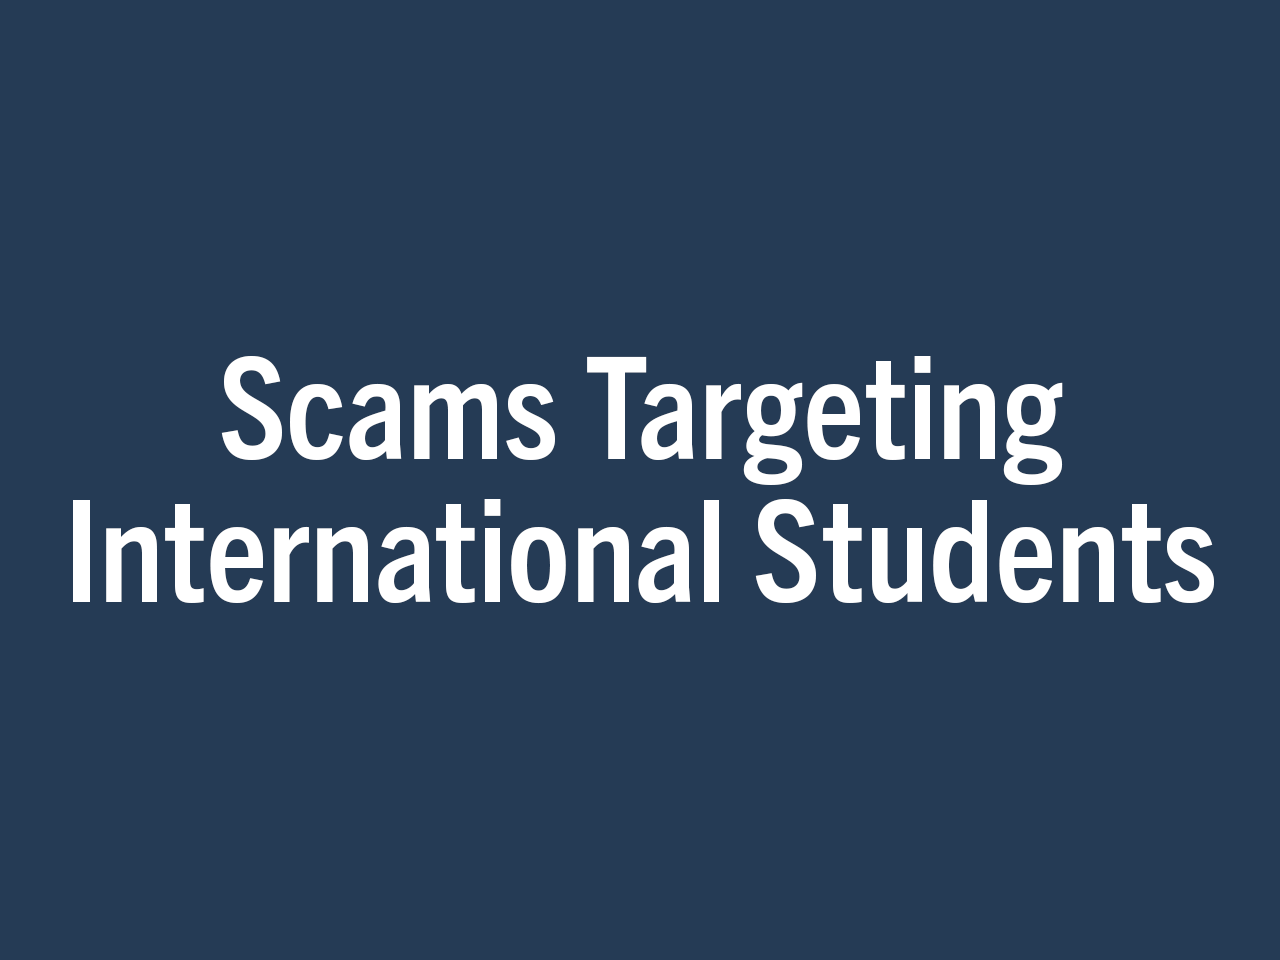 Scams Targeting International Students